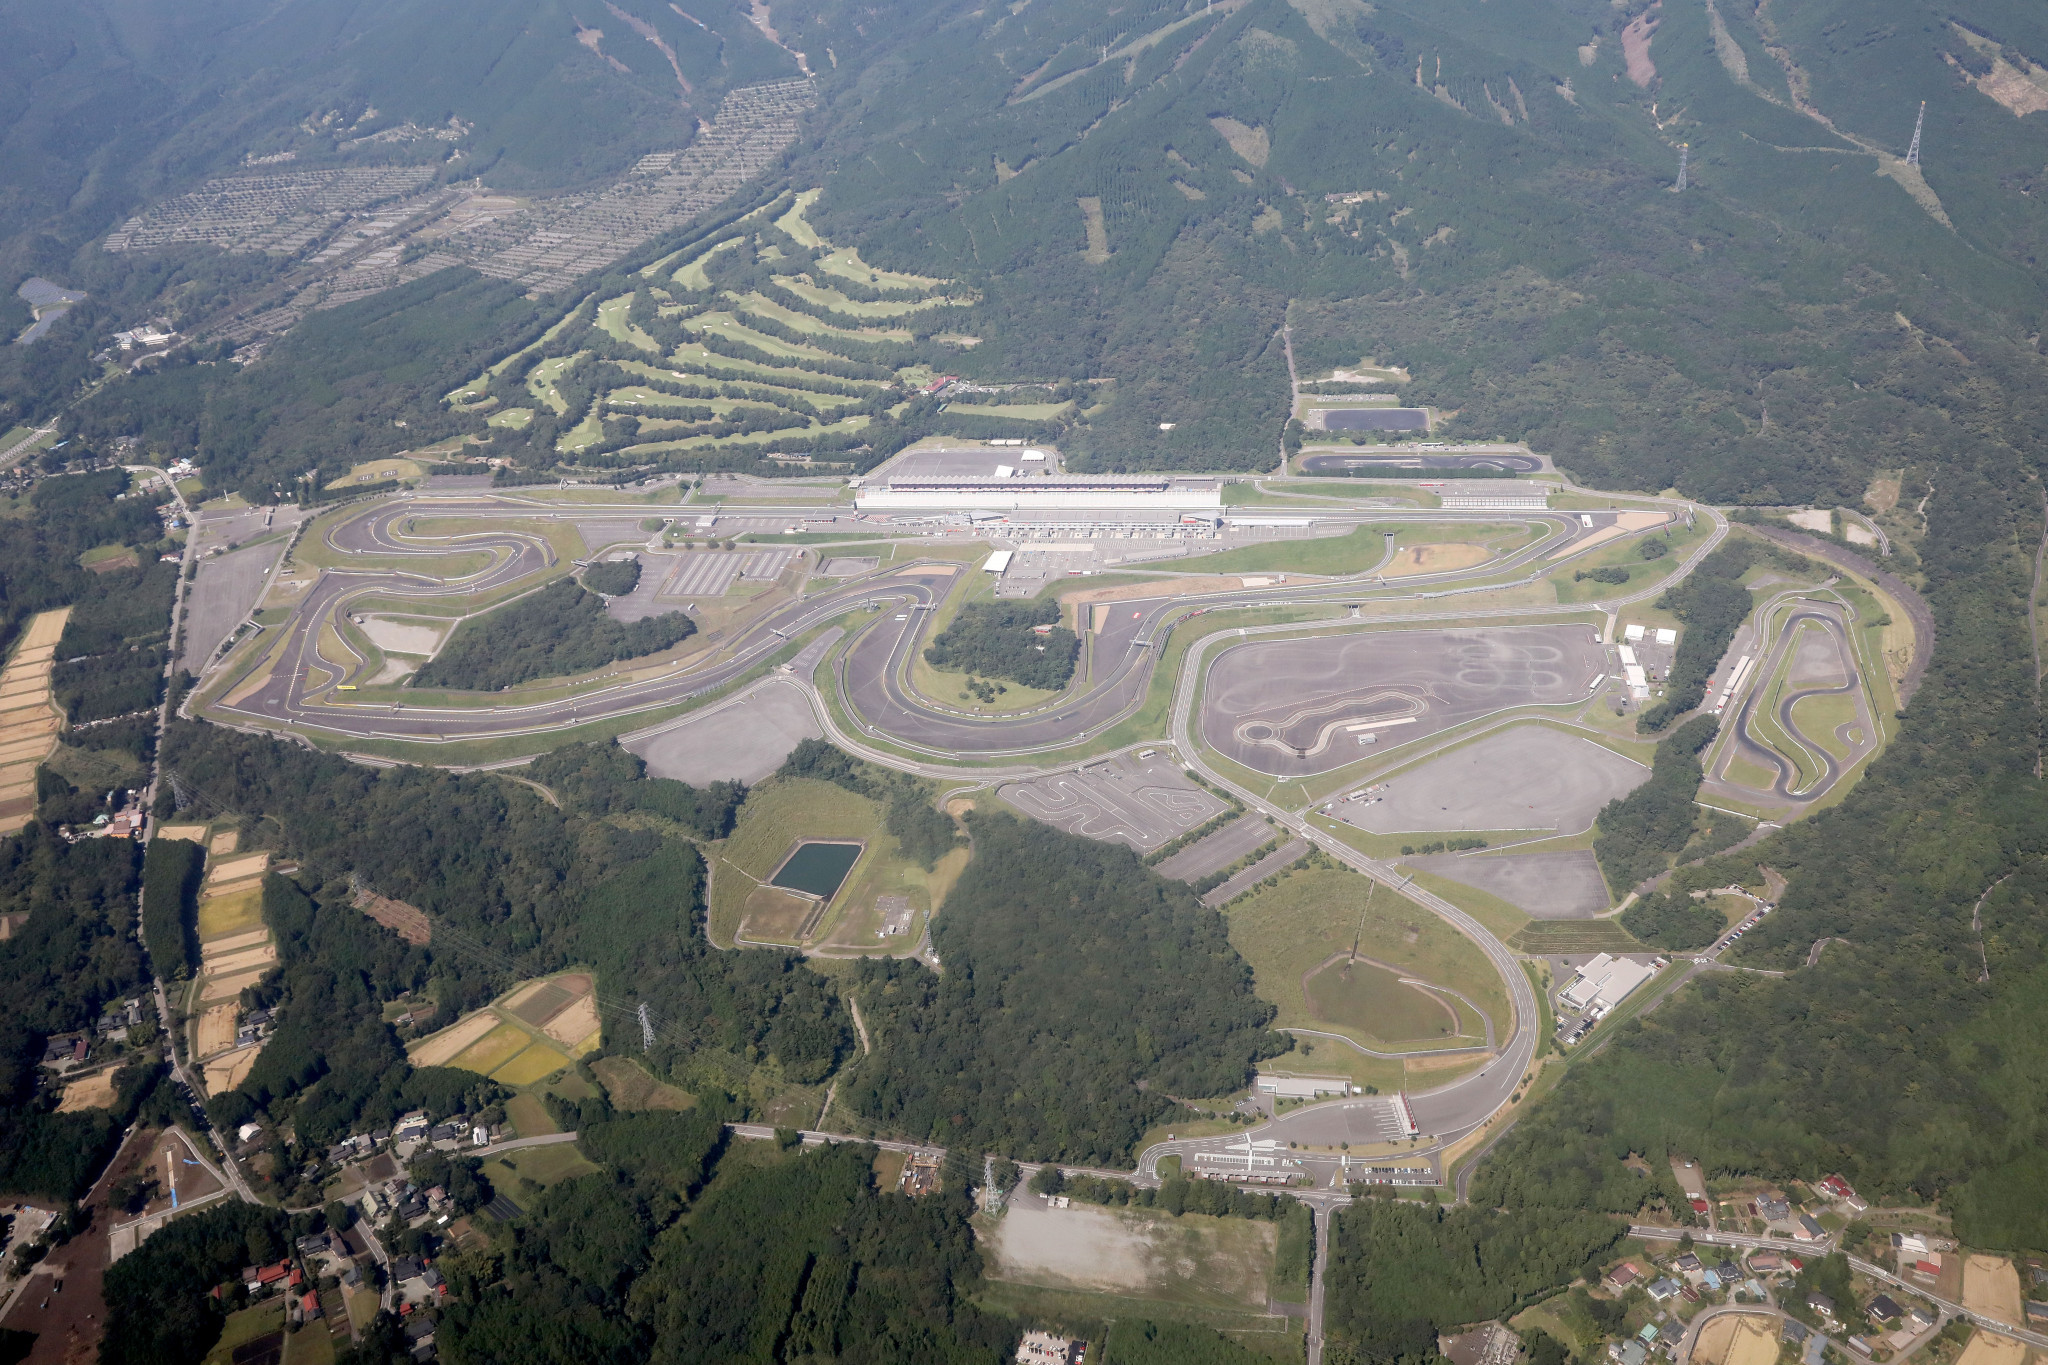 The routes for the Tokyo 2020 Olympic cycling individual time trial event and the Paralympic cycling road race, individual time trial and team relay events will start and end at the Fuji Speedway motor racing circuit ©Tokyo 2020